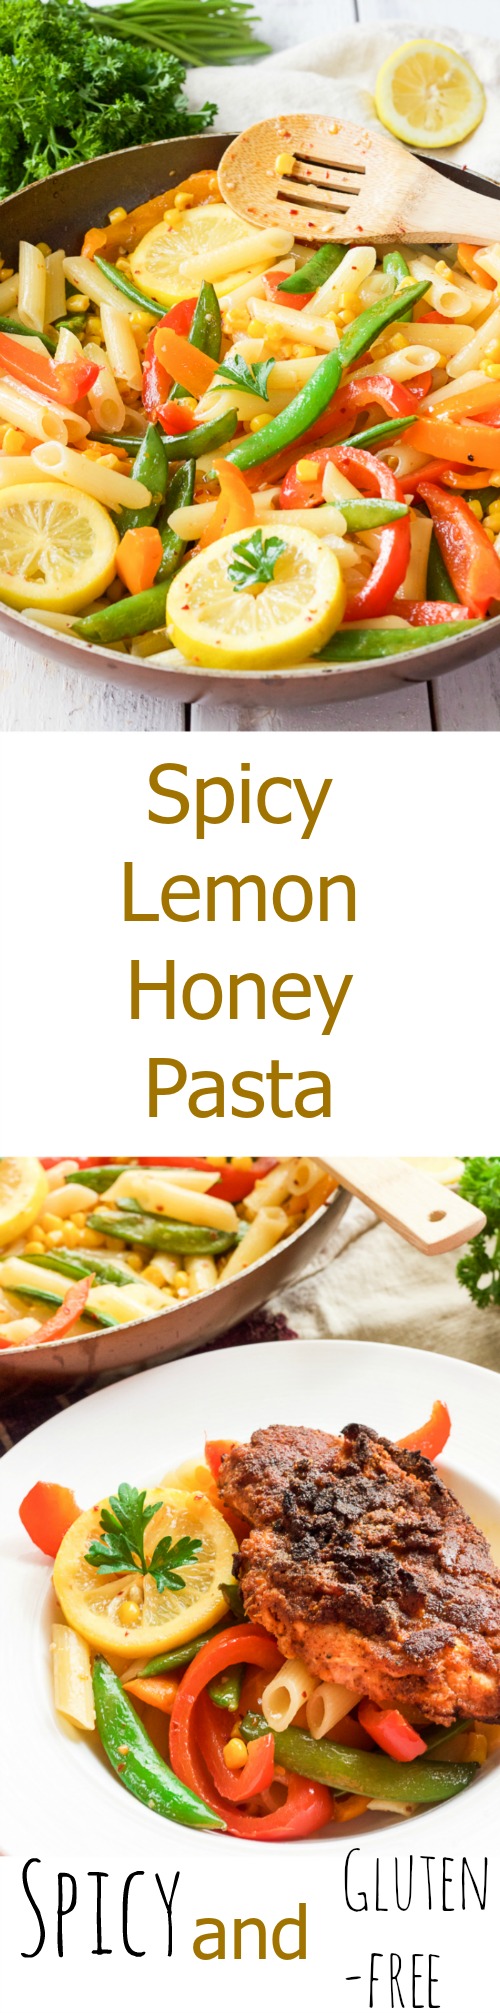 This spicy lemon honey hot chicken pasta dish is an amazing light, sweet and spicy pasta dish, topped with juicy, crispy gluten-free hot chicken, for one delicious meal!